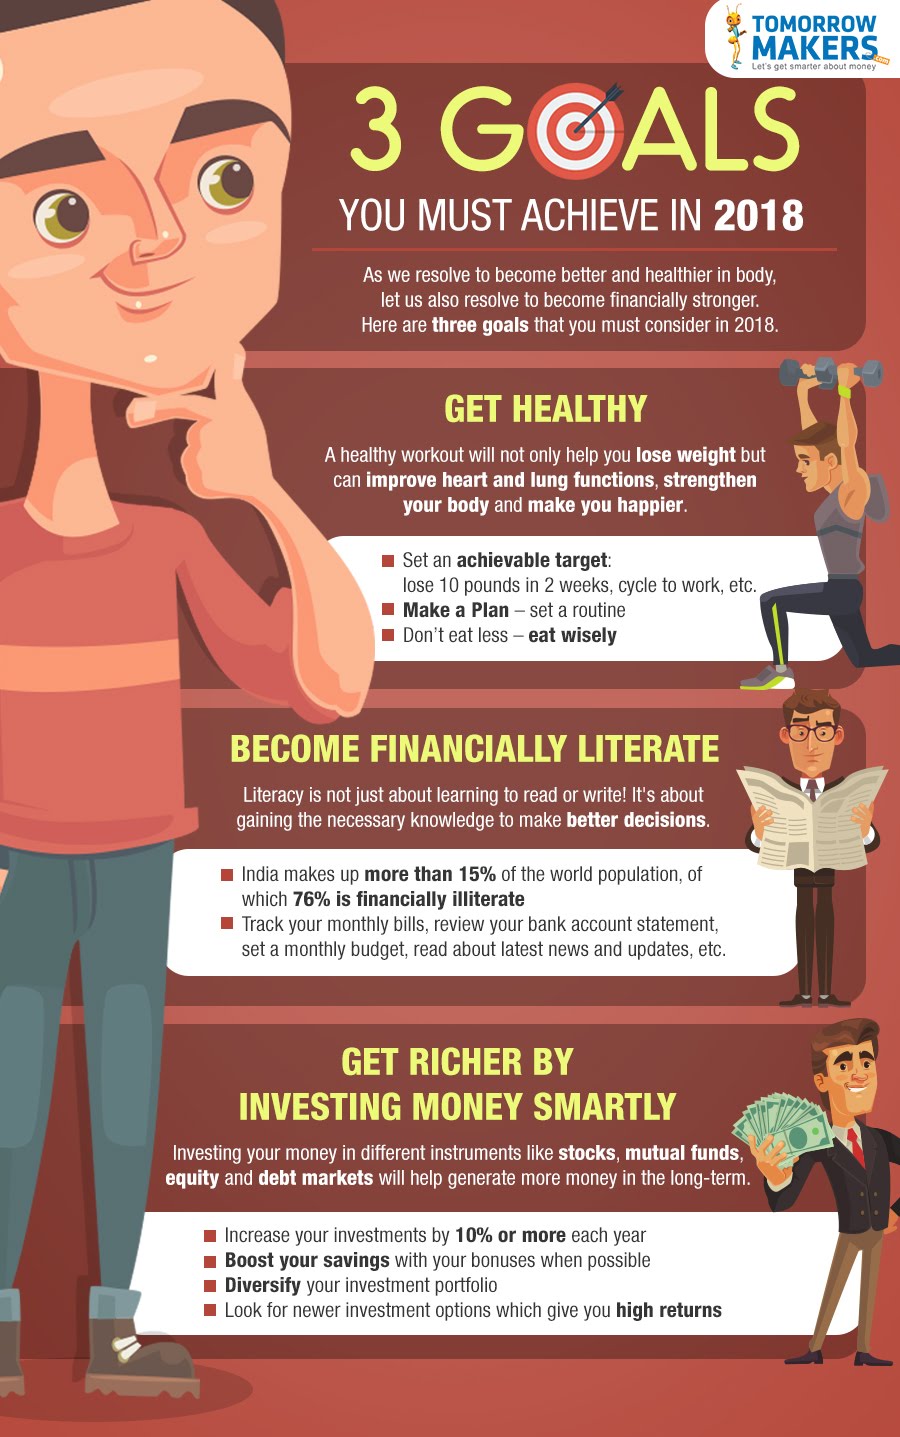 3 Goals You Must Achieve in 2018 #Infographic